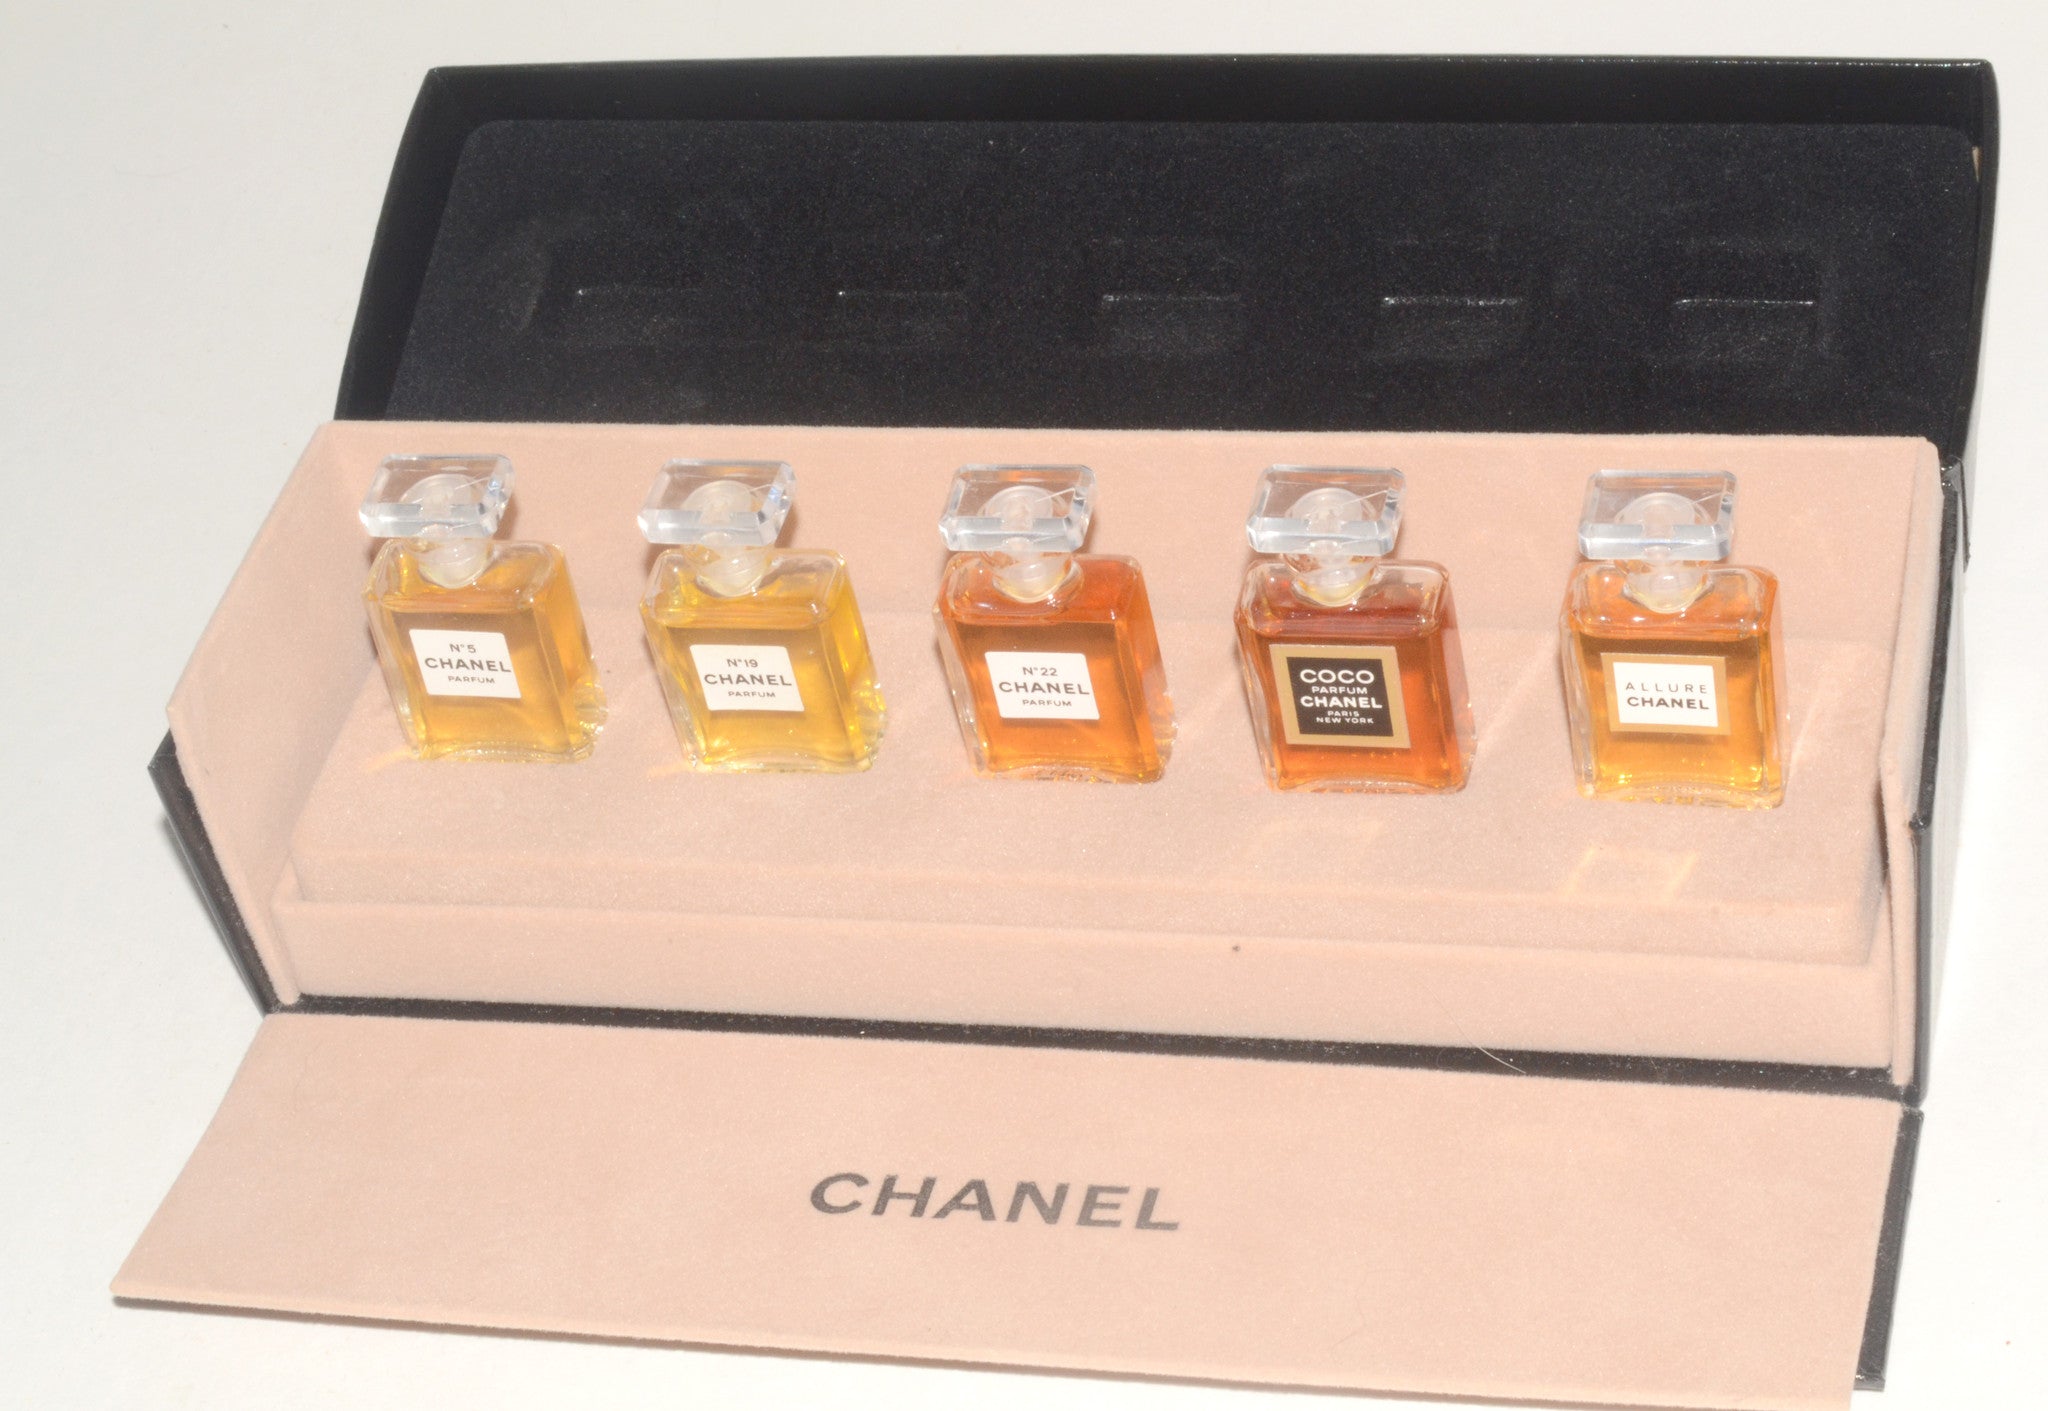 Chanel Perfume Miniature Boxed Set | Quirky Finds